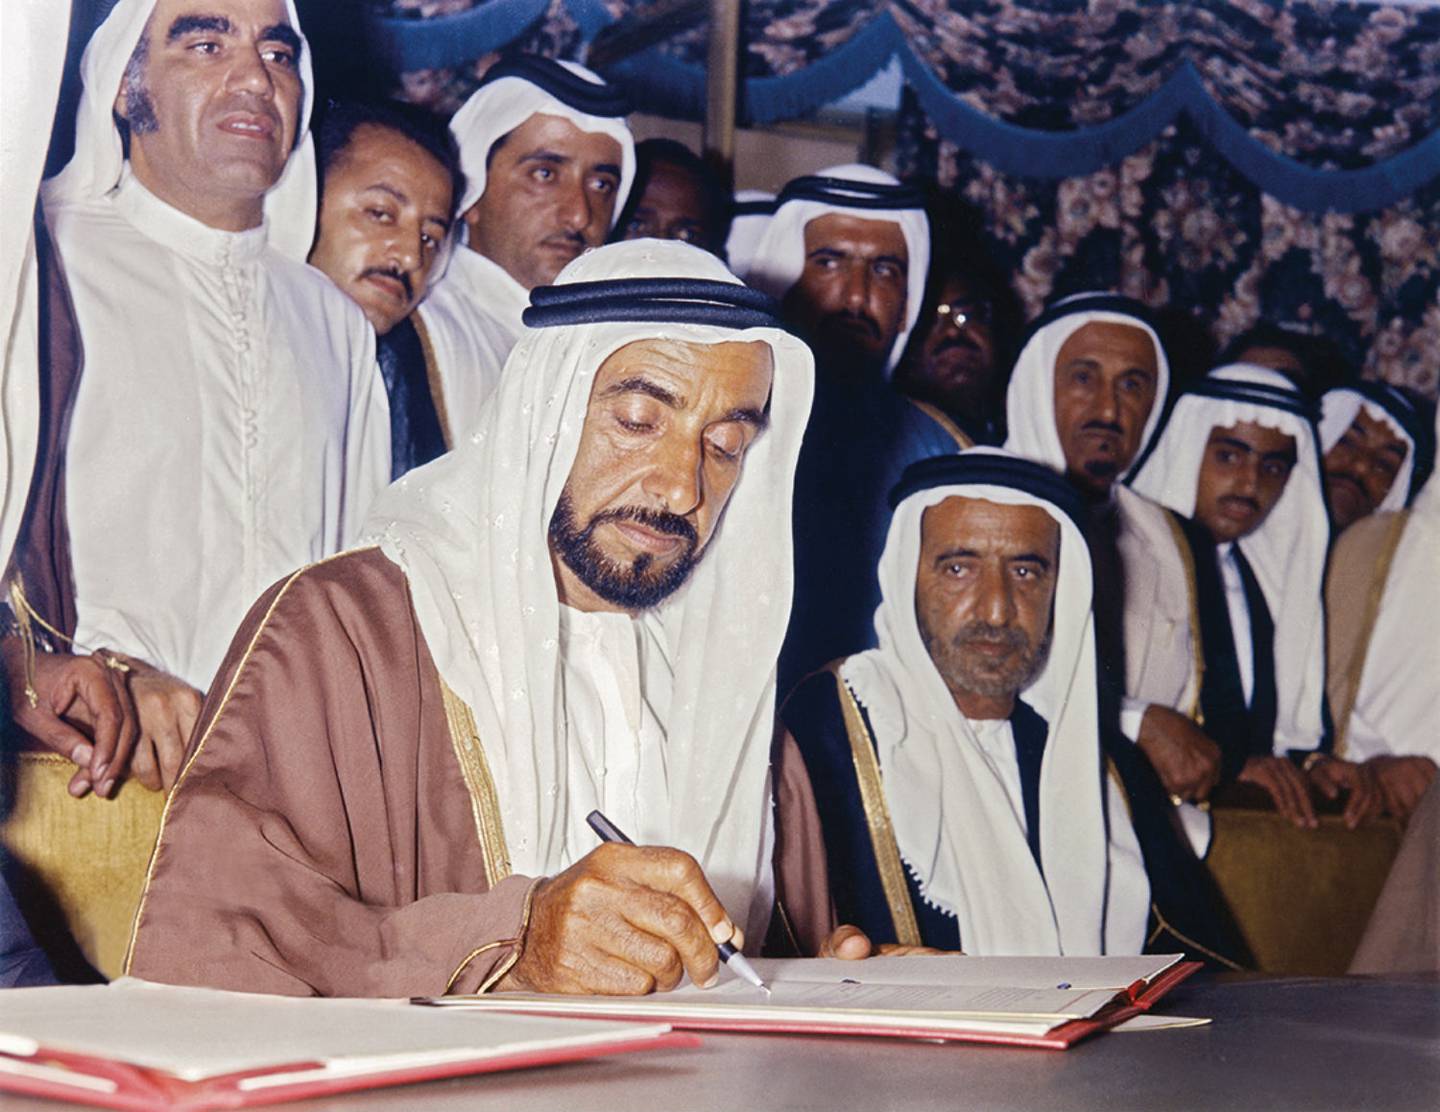 The UAE’s Founding Father, the late Sheikh Zayed, had a sustainable development legacy that inspired the Zayed Sustainability Prize. Ramesh Shukla